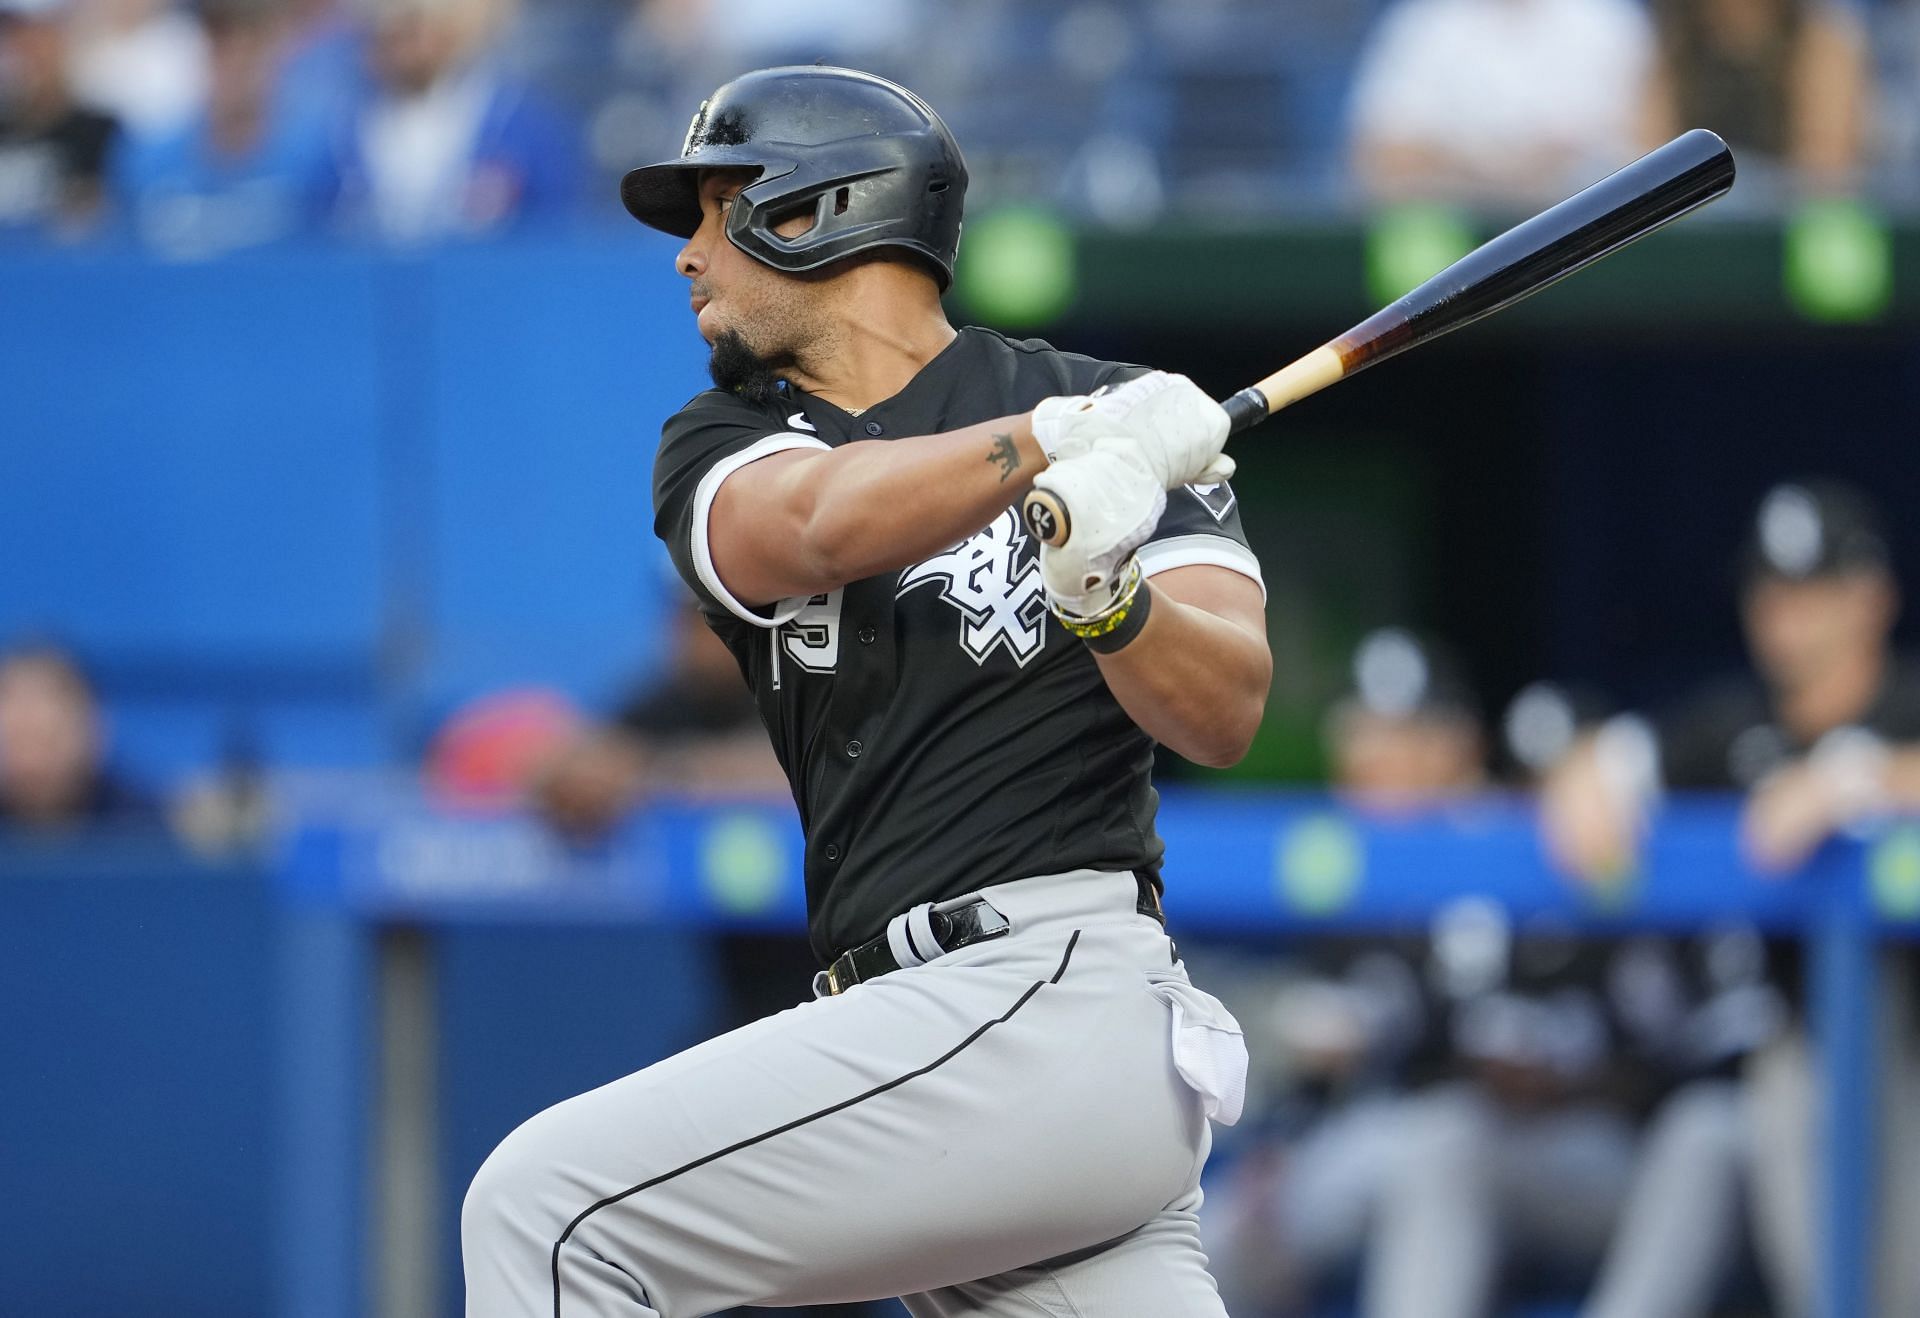 Jose Abreu has been carrying the load for the White Sox, especially in the absence of Tim Anderson.